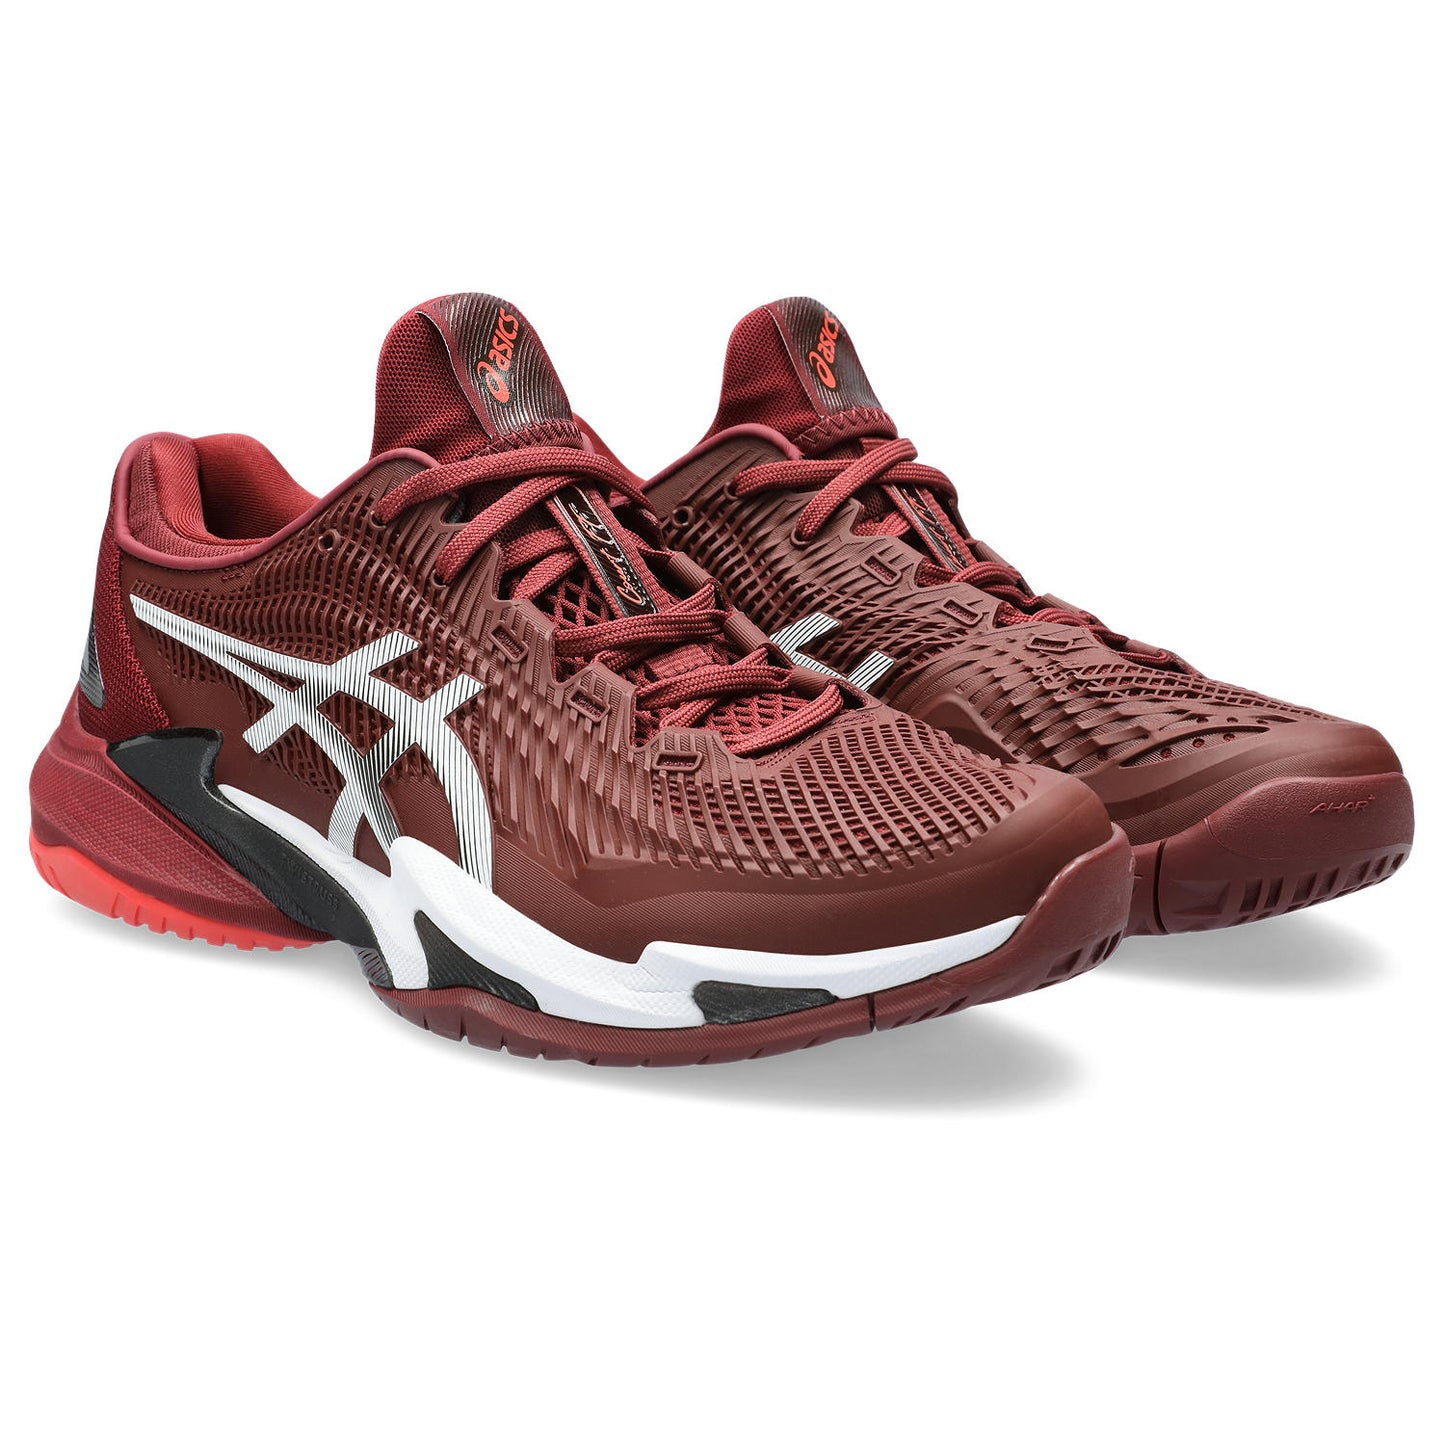 Asics Court FF 3 men's tennis shoes 370.600 Red/White